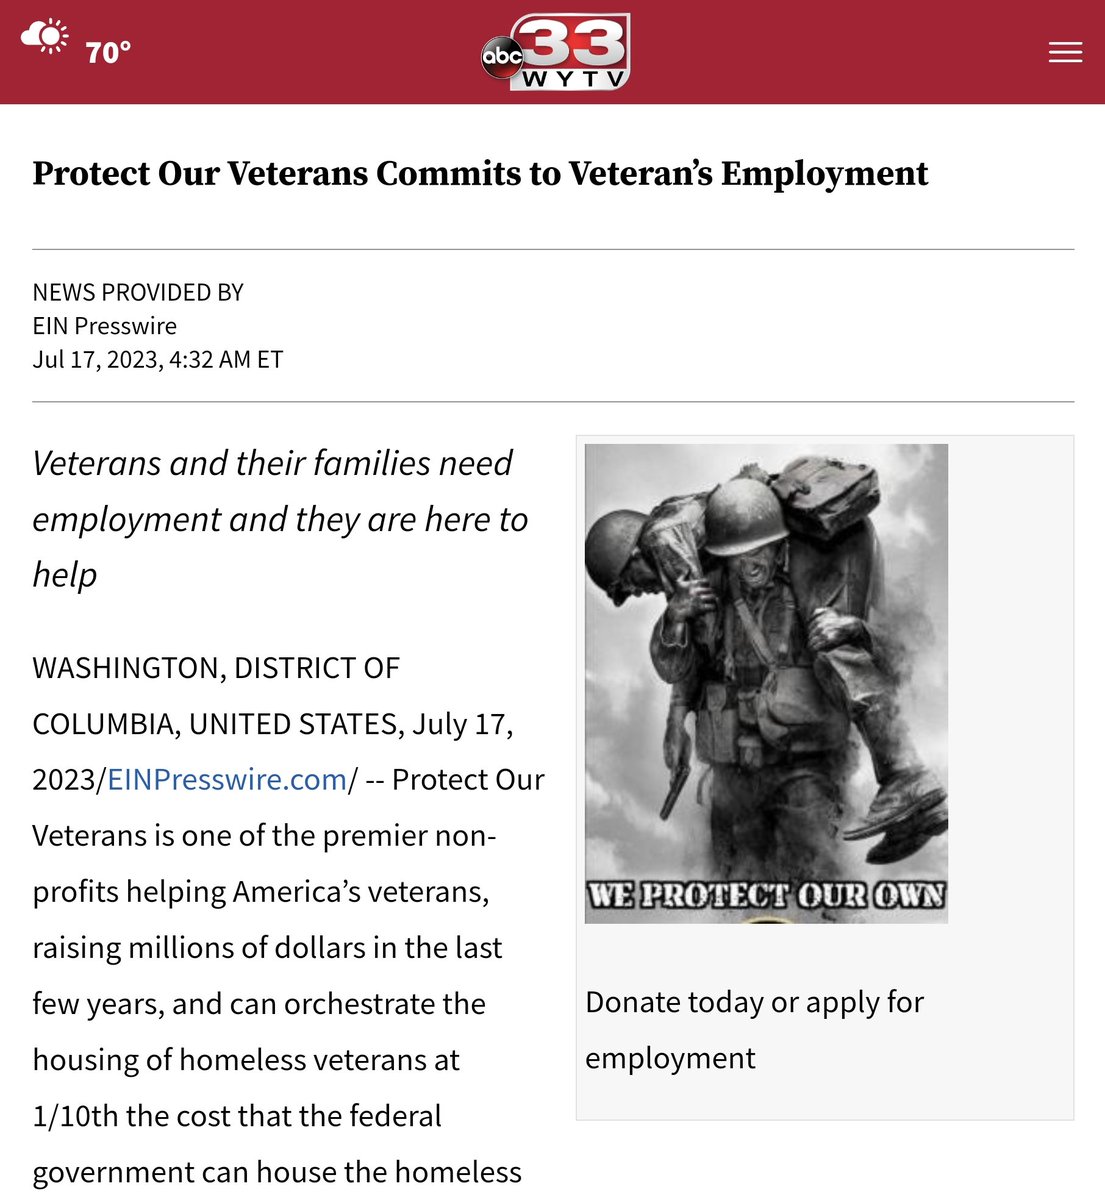 Jobs! Jobs! Jobs! We have employment and training opportunities for veterans and their immediate families. Go to protectourveterans.org and leave your resume, sign up for a training, or leave a donation to support our wonderful programs, where every dollar goes to veterans.